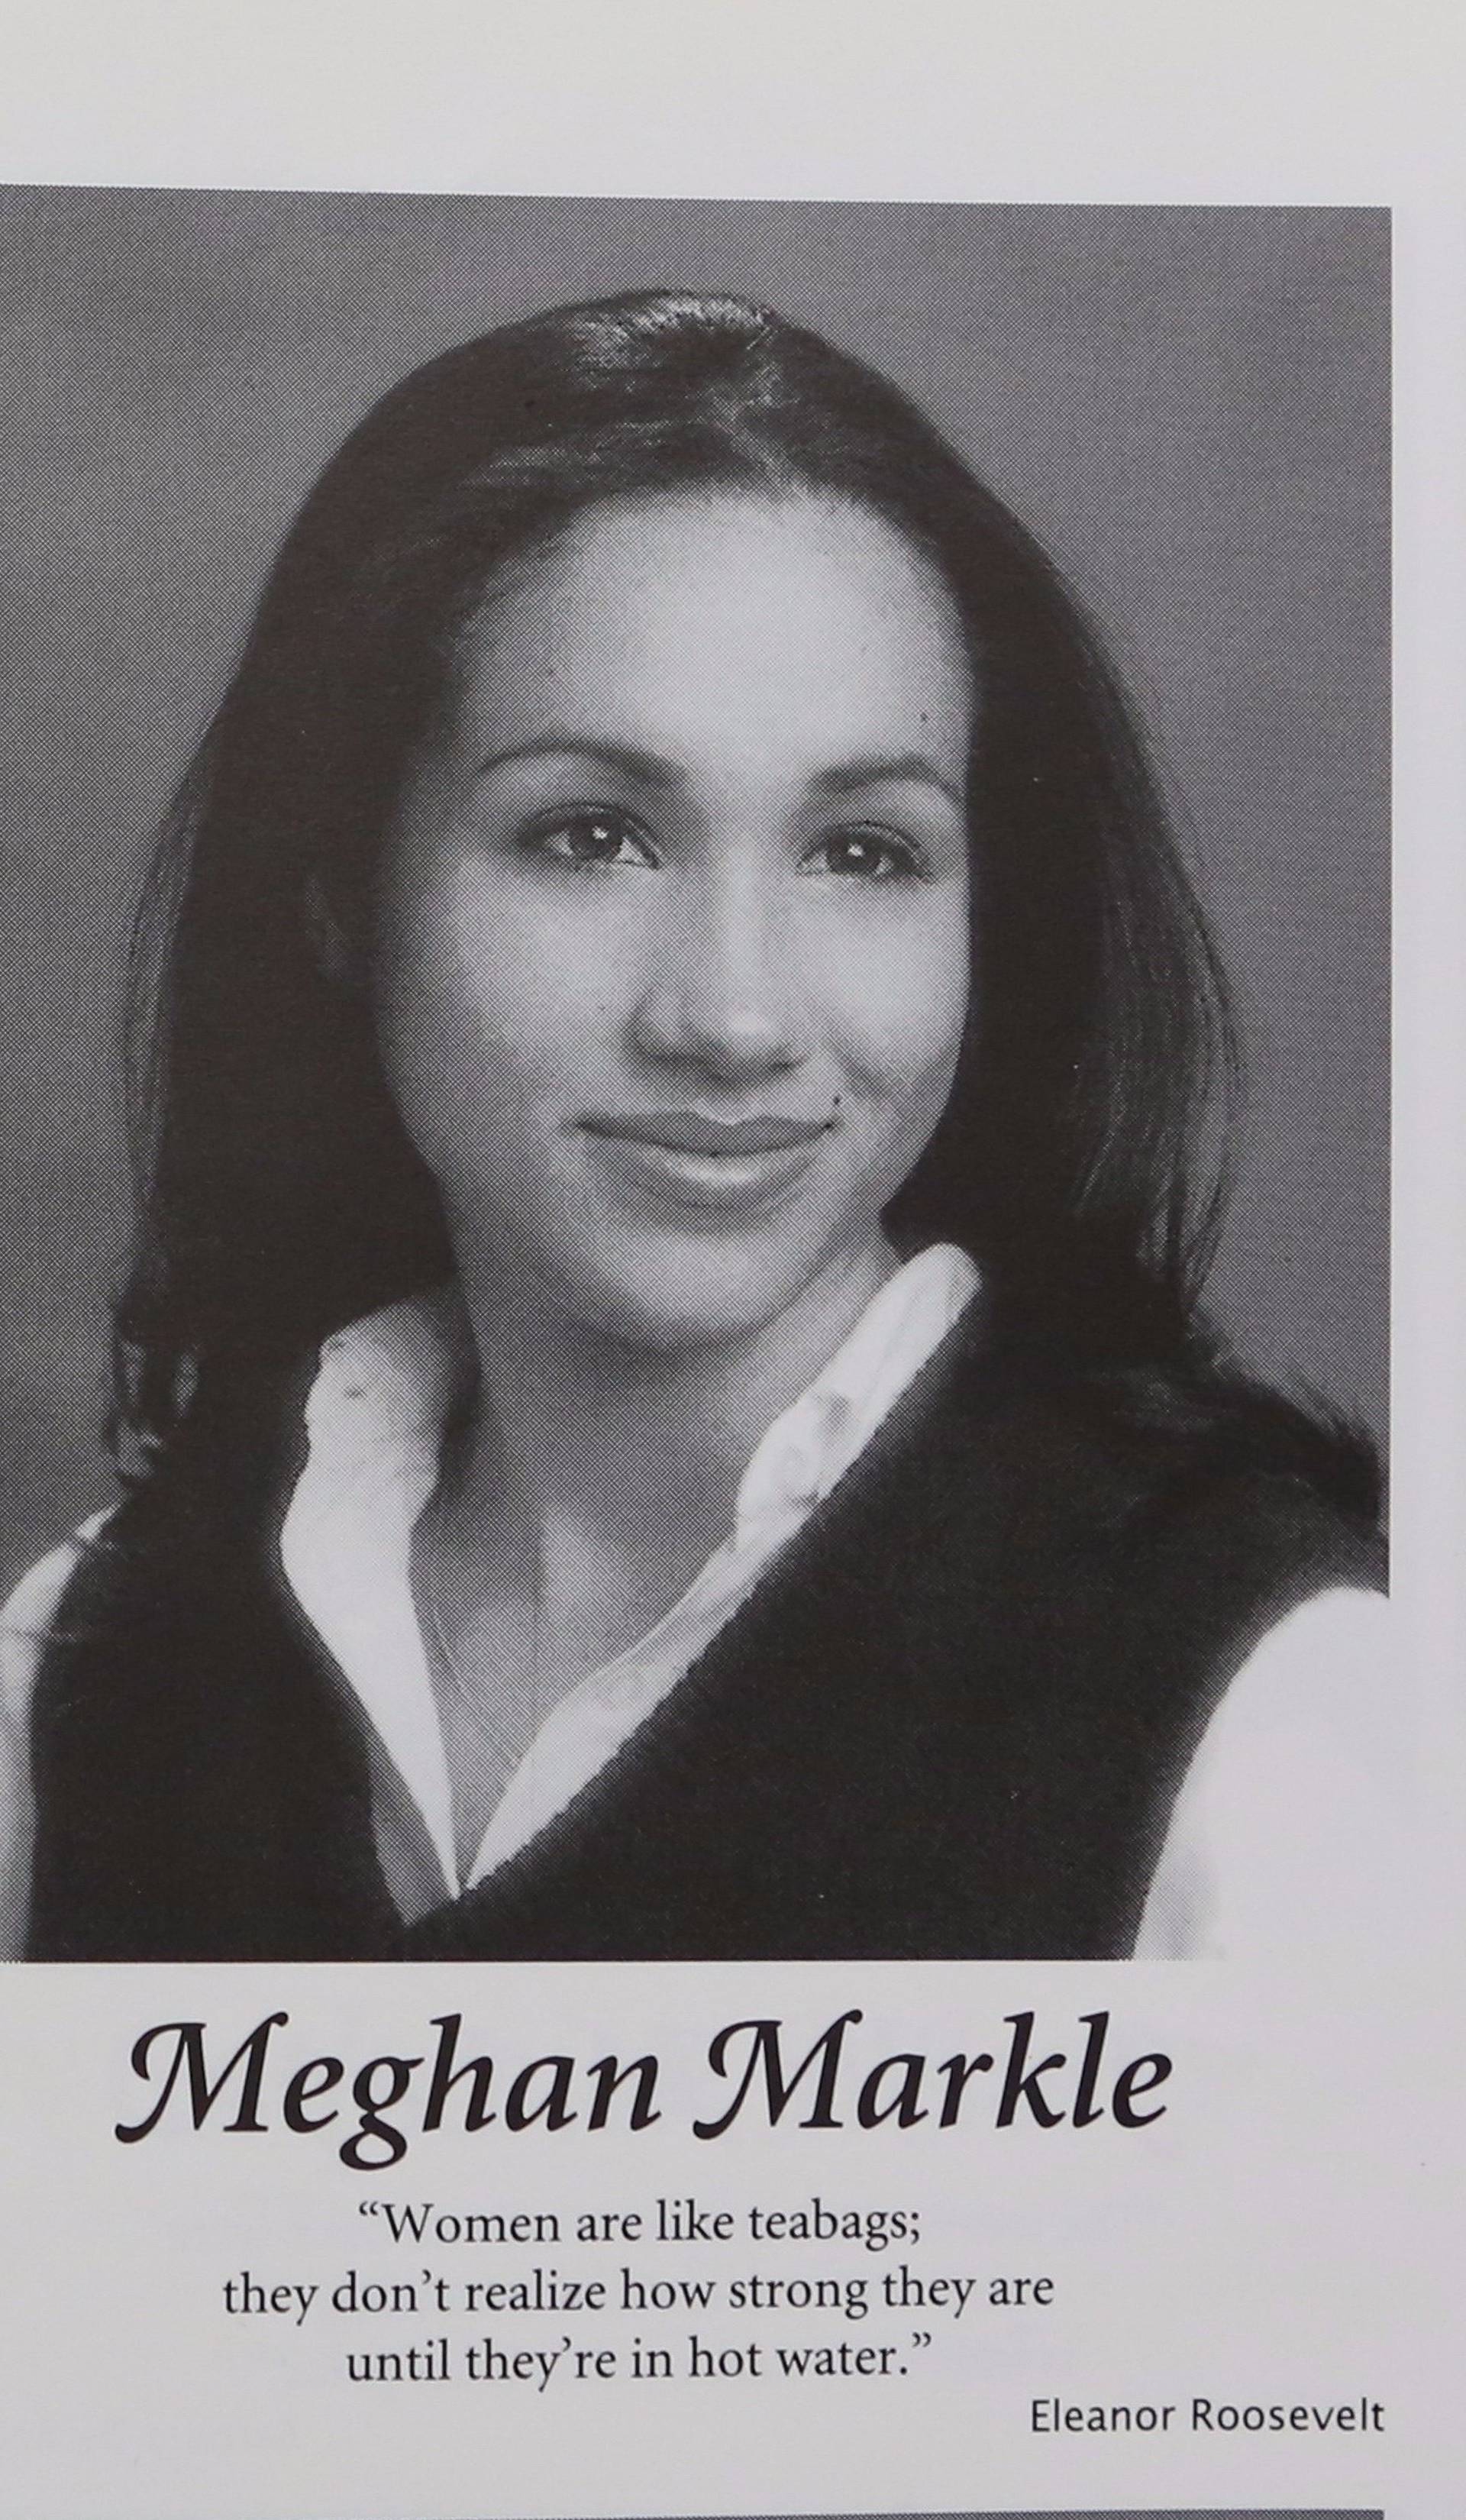 Meghan Markle's yearbook photos prove she's always been royal!